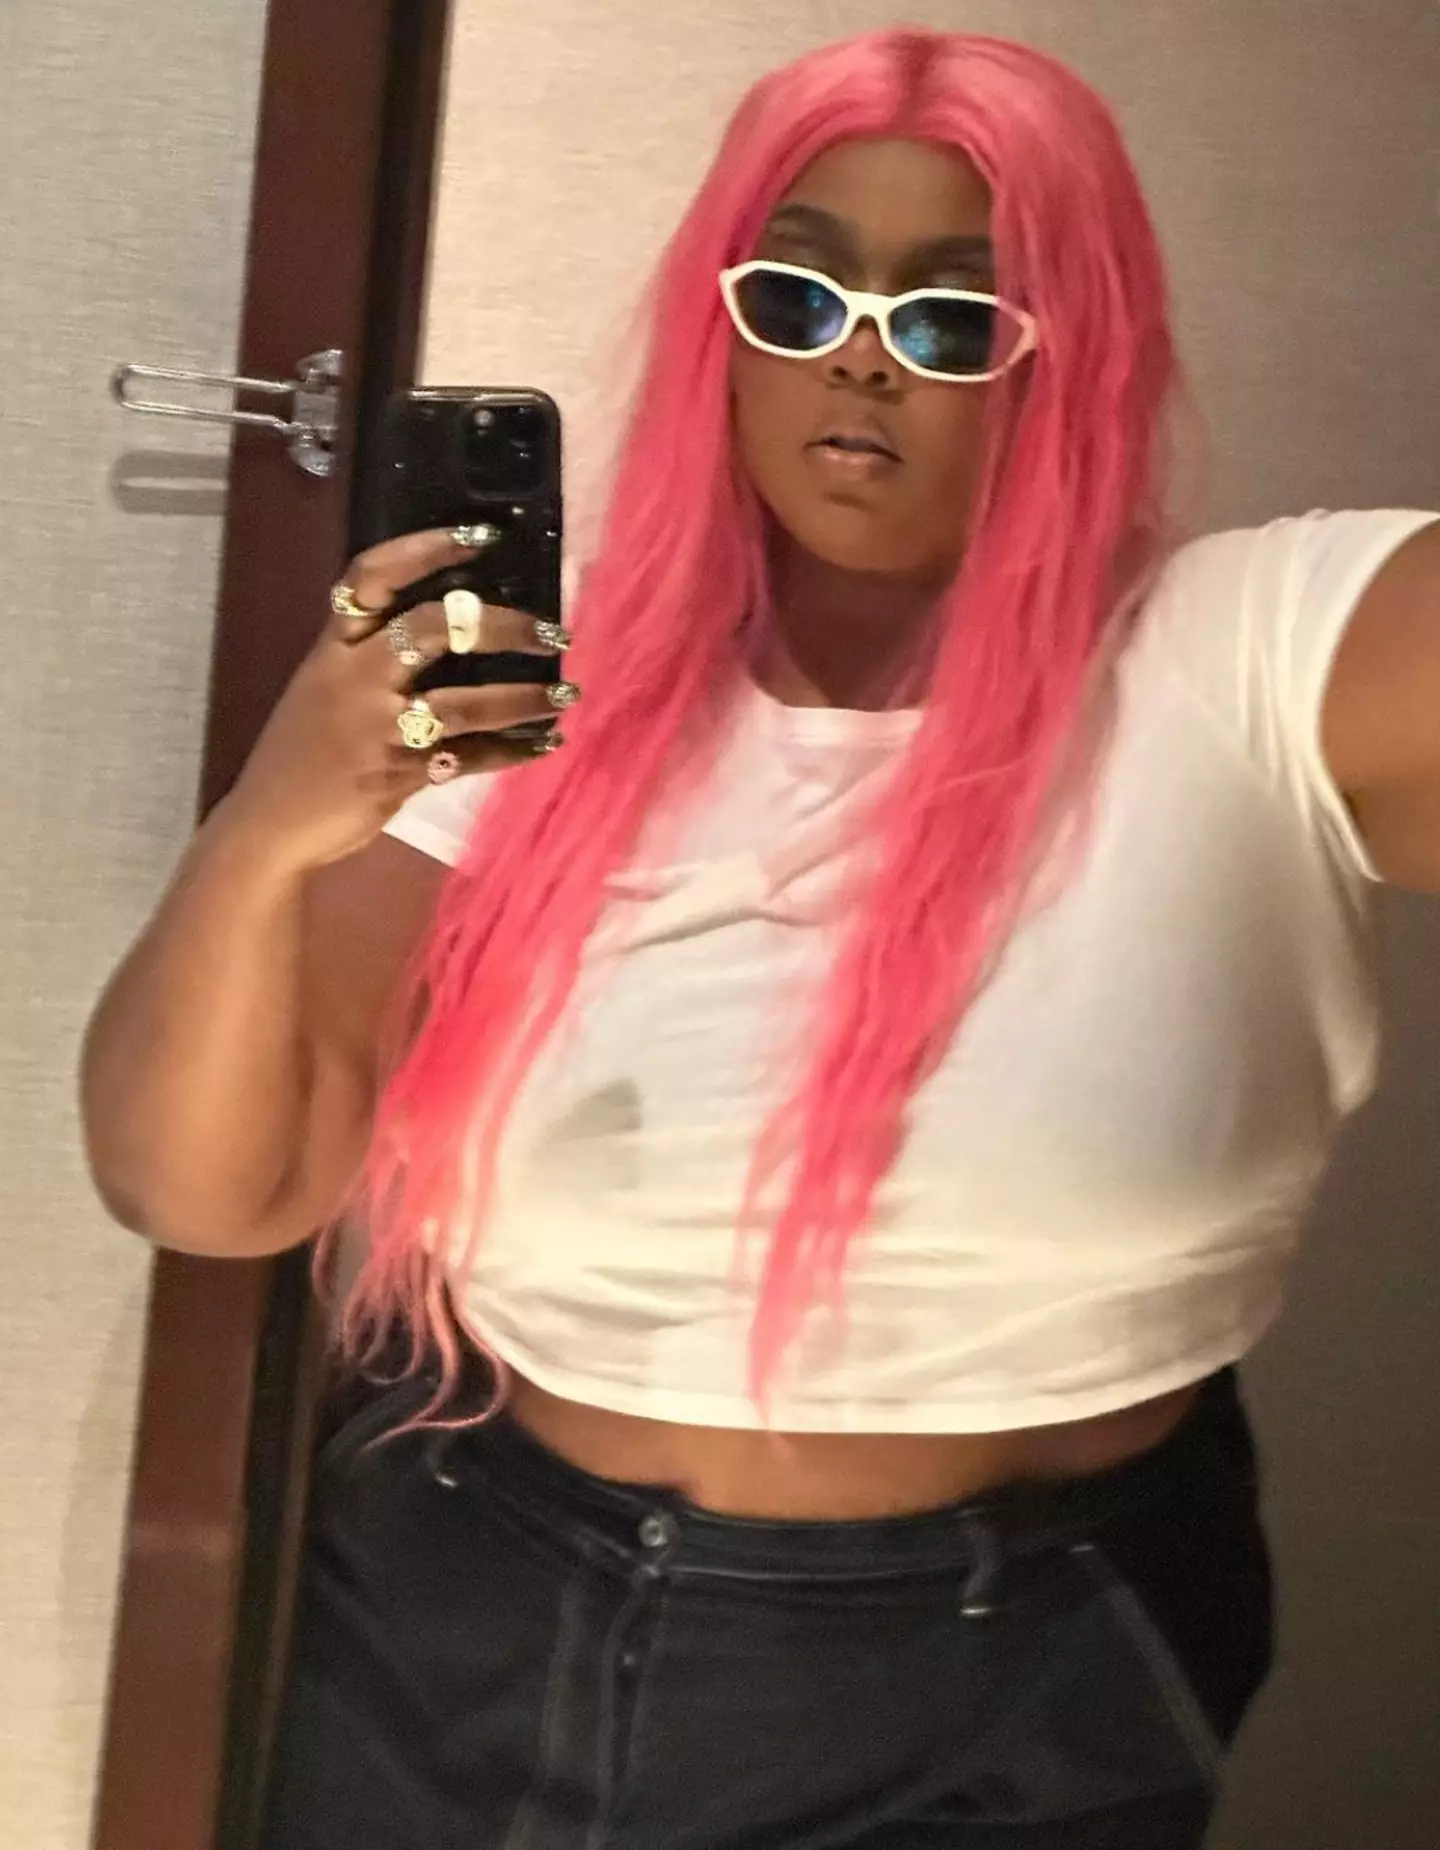 Lizzo spoke out against the troll comments she gets daily on social media.